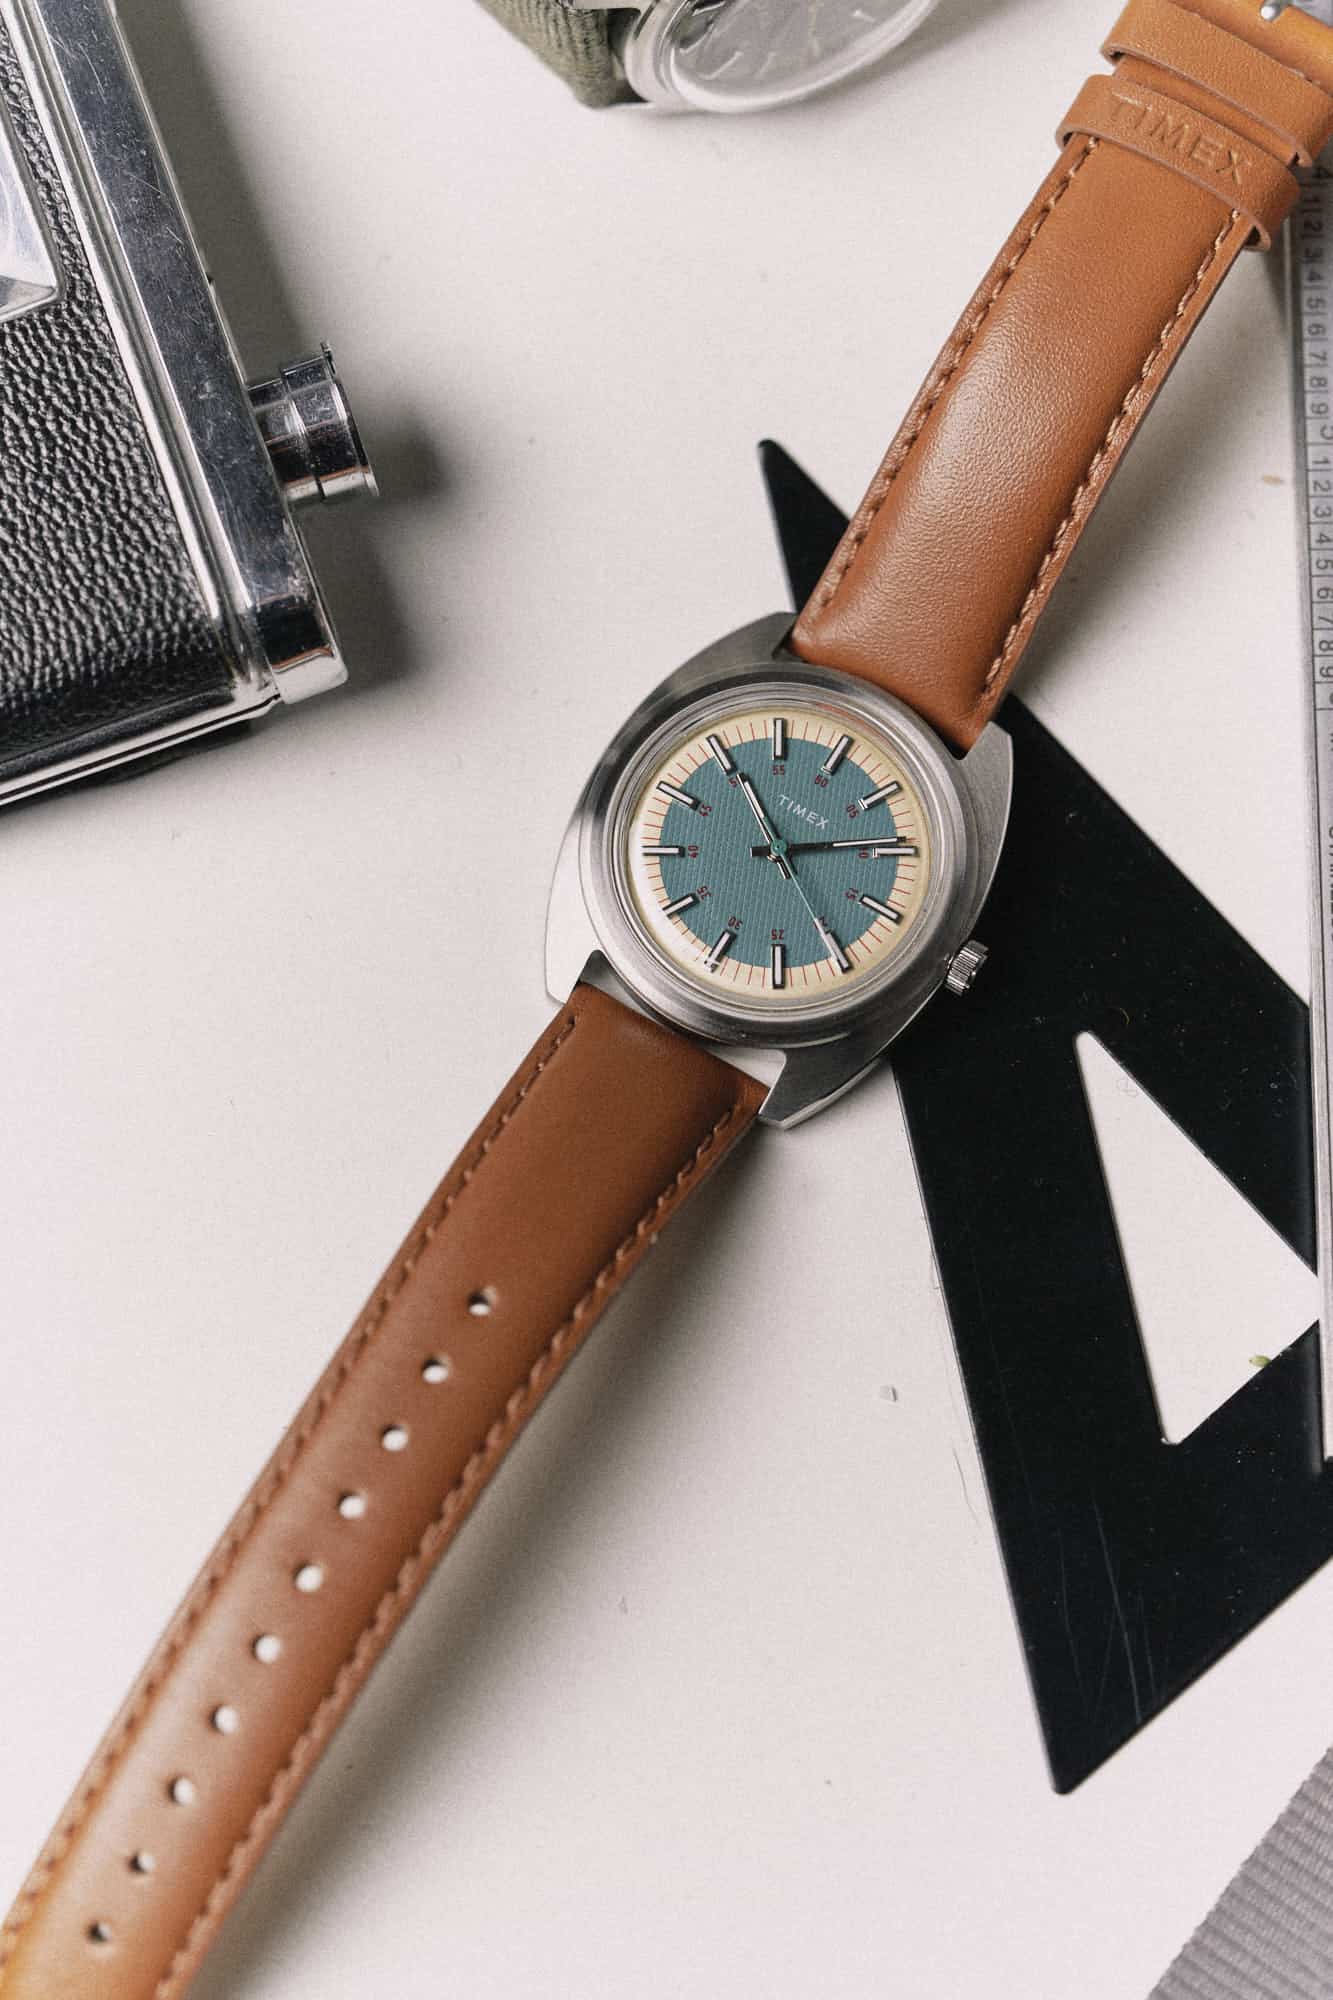 Taking it Easy with The Timex x Worn & Wound WW75 Limited Edition 